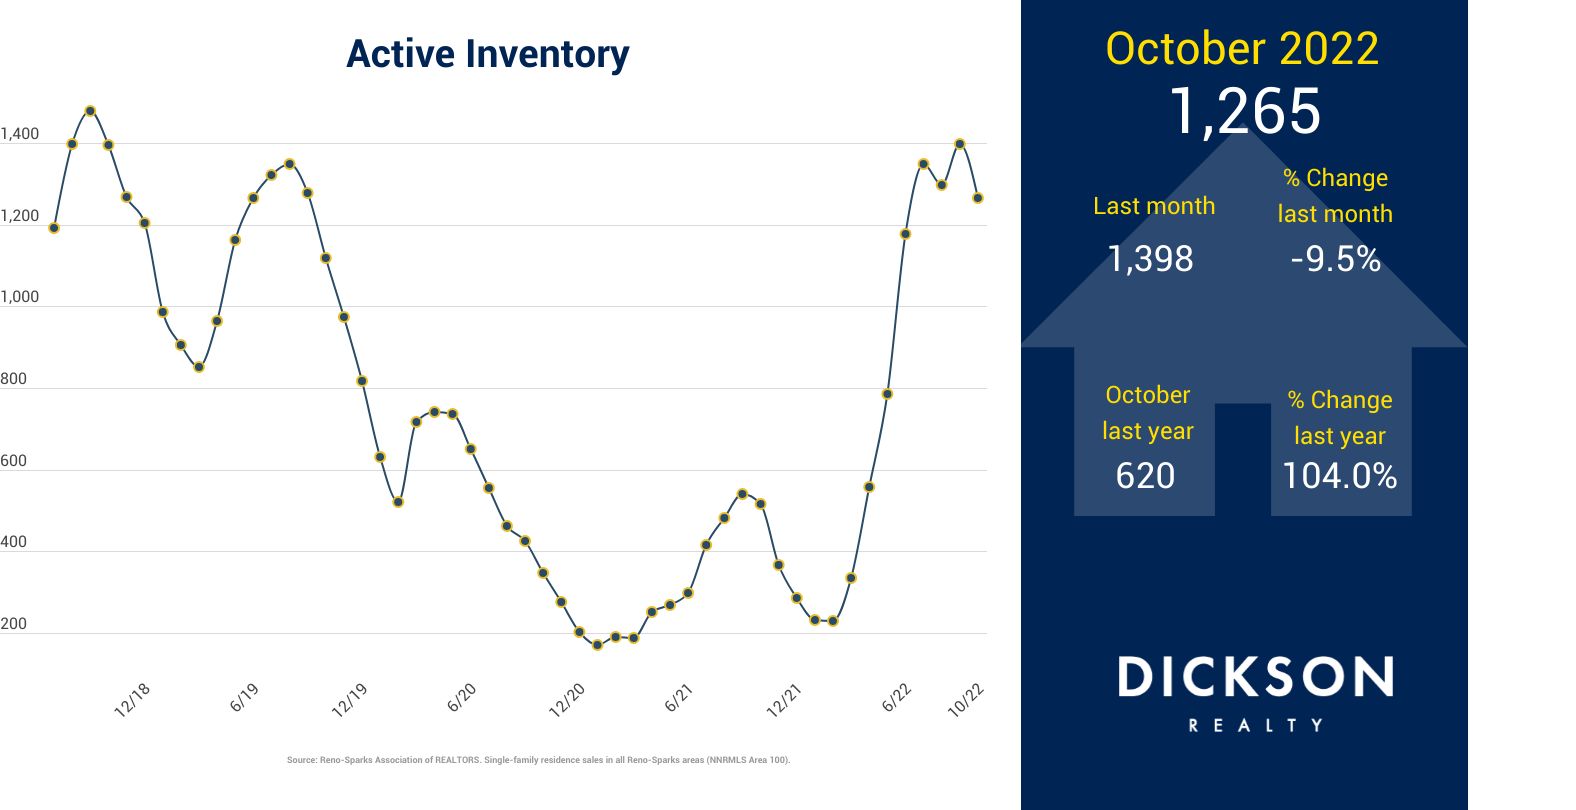 Northern Nevada Real Estate Update - Active Inventory